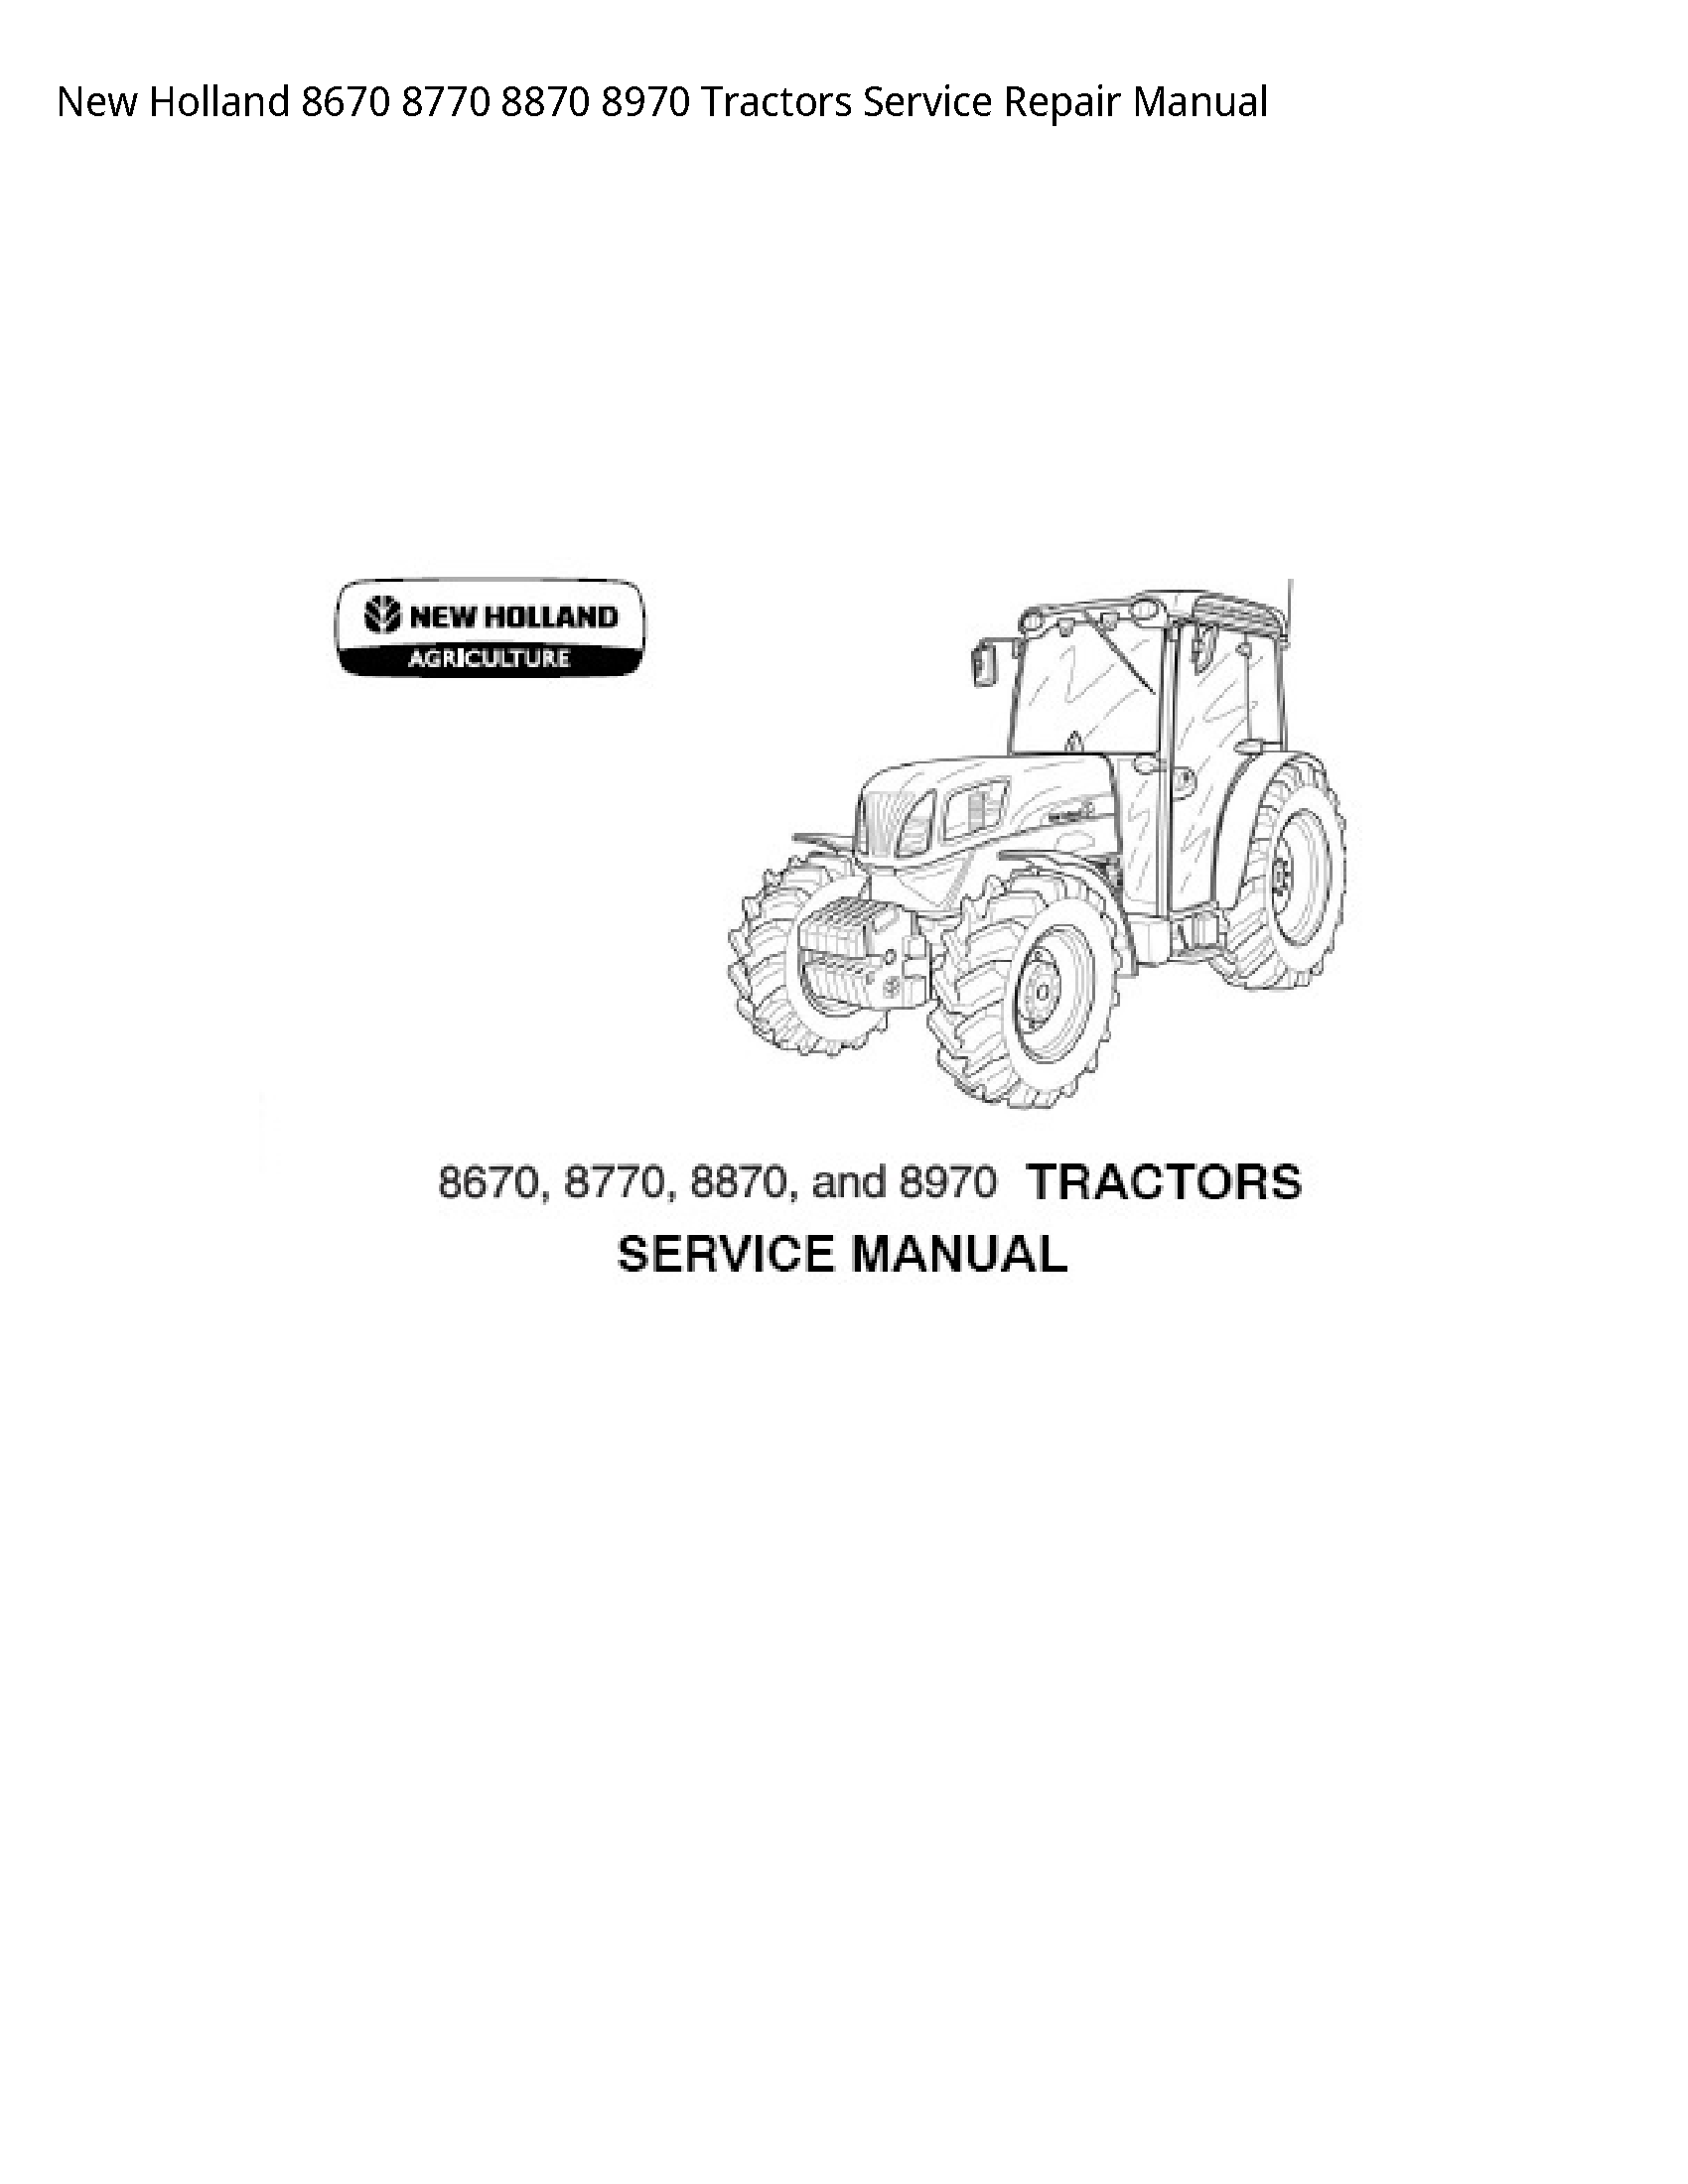 ford 8970 service manual